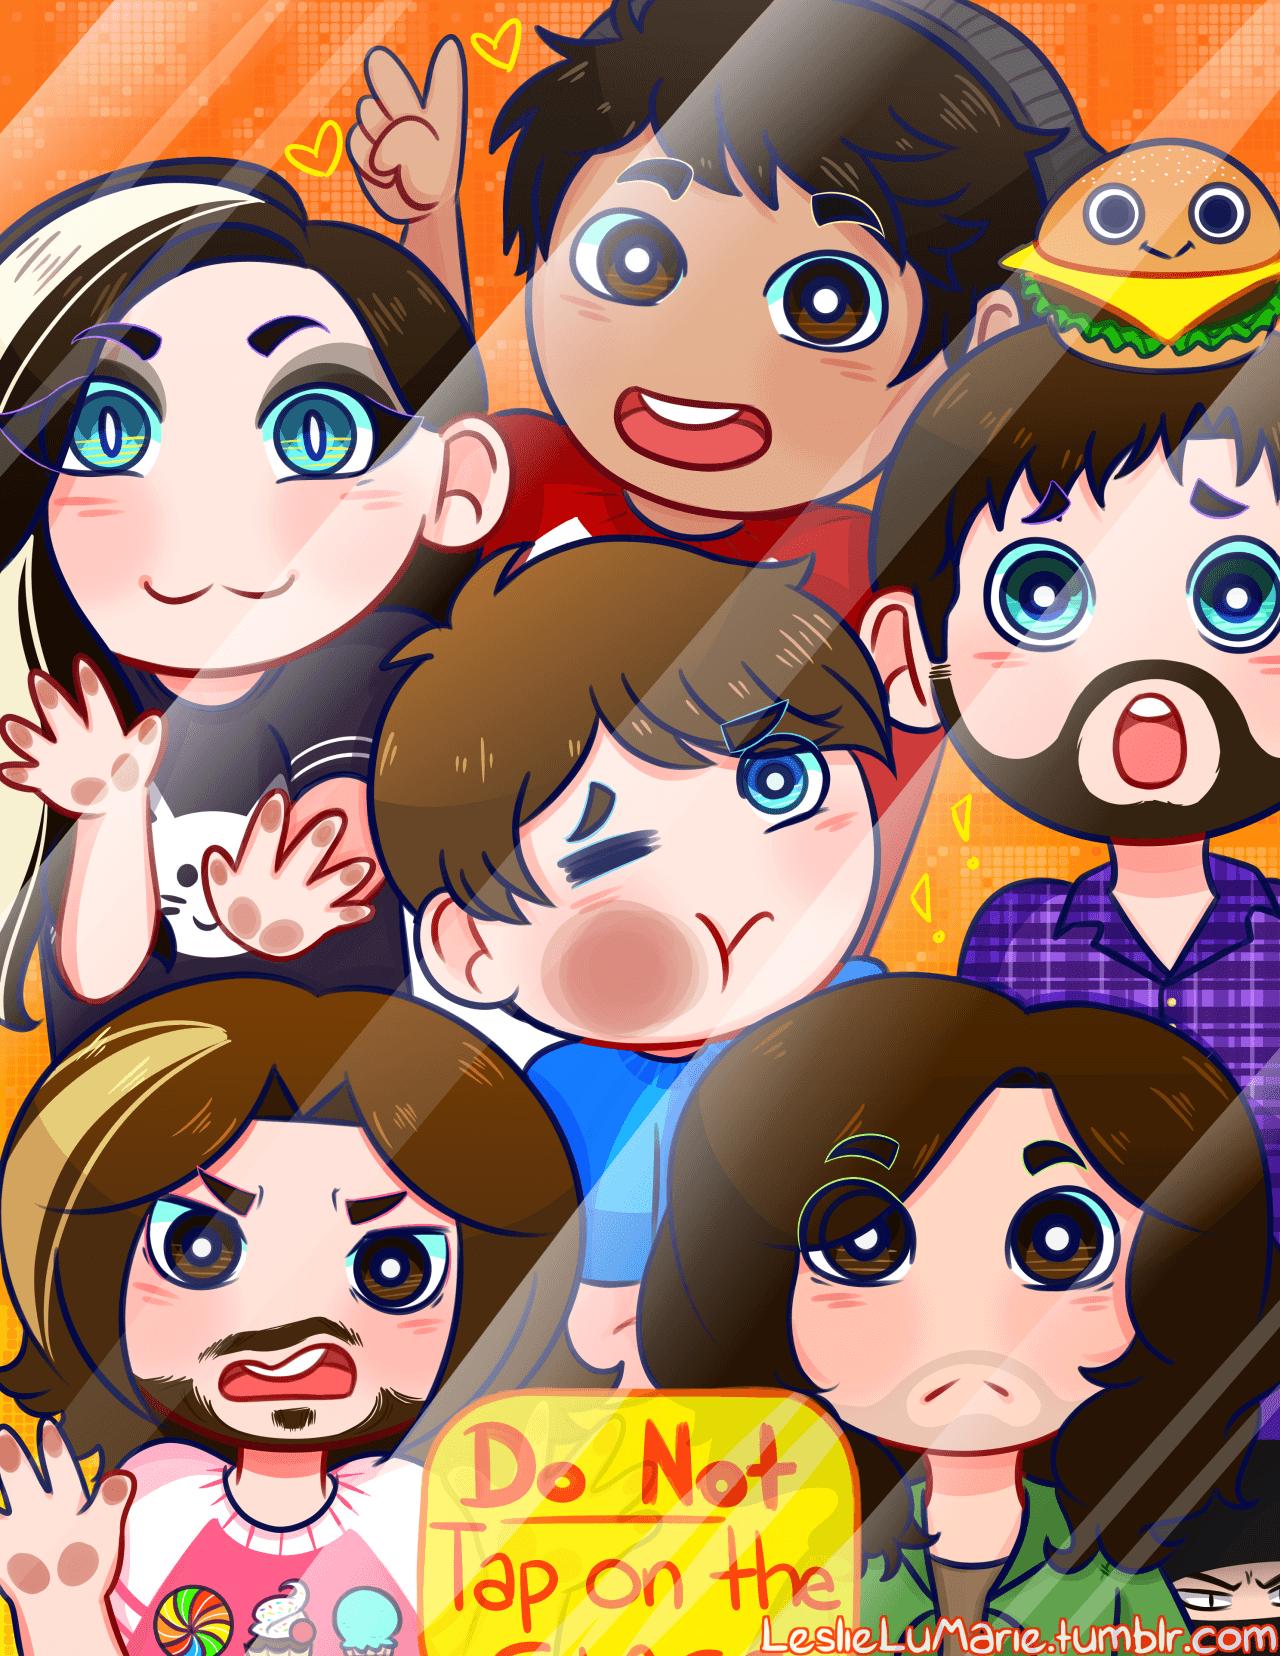 leslielumarie: “Grumps!”My submission for the Game Grumps